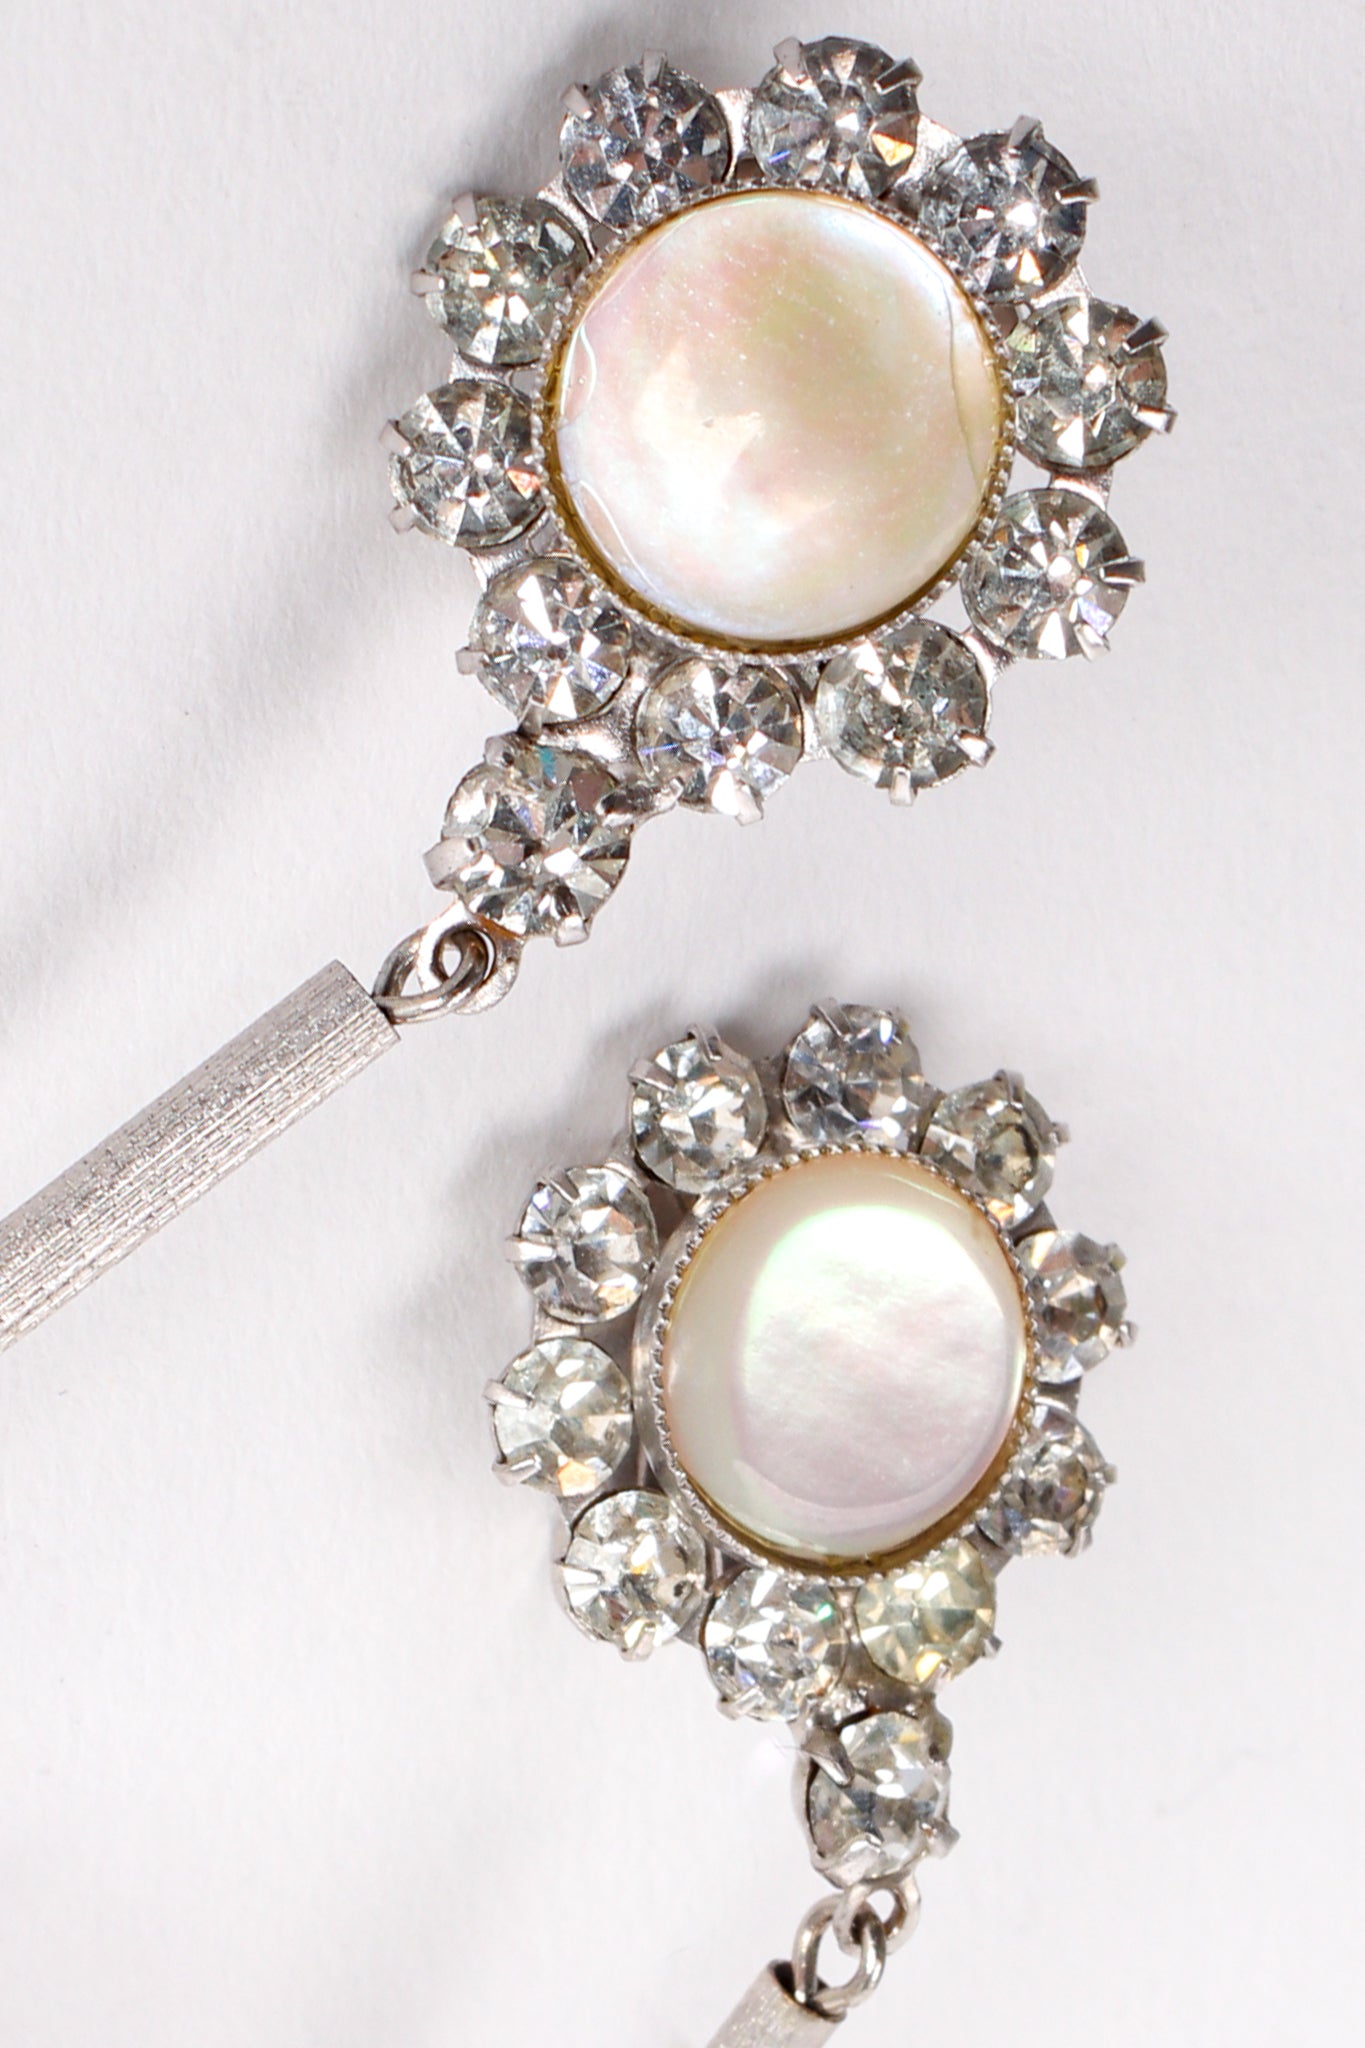 Vintage Mother-Of-Pearl Ball Drop Earrings detail at Recess Los Angeles